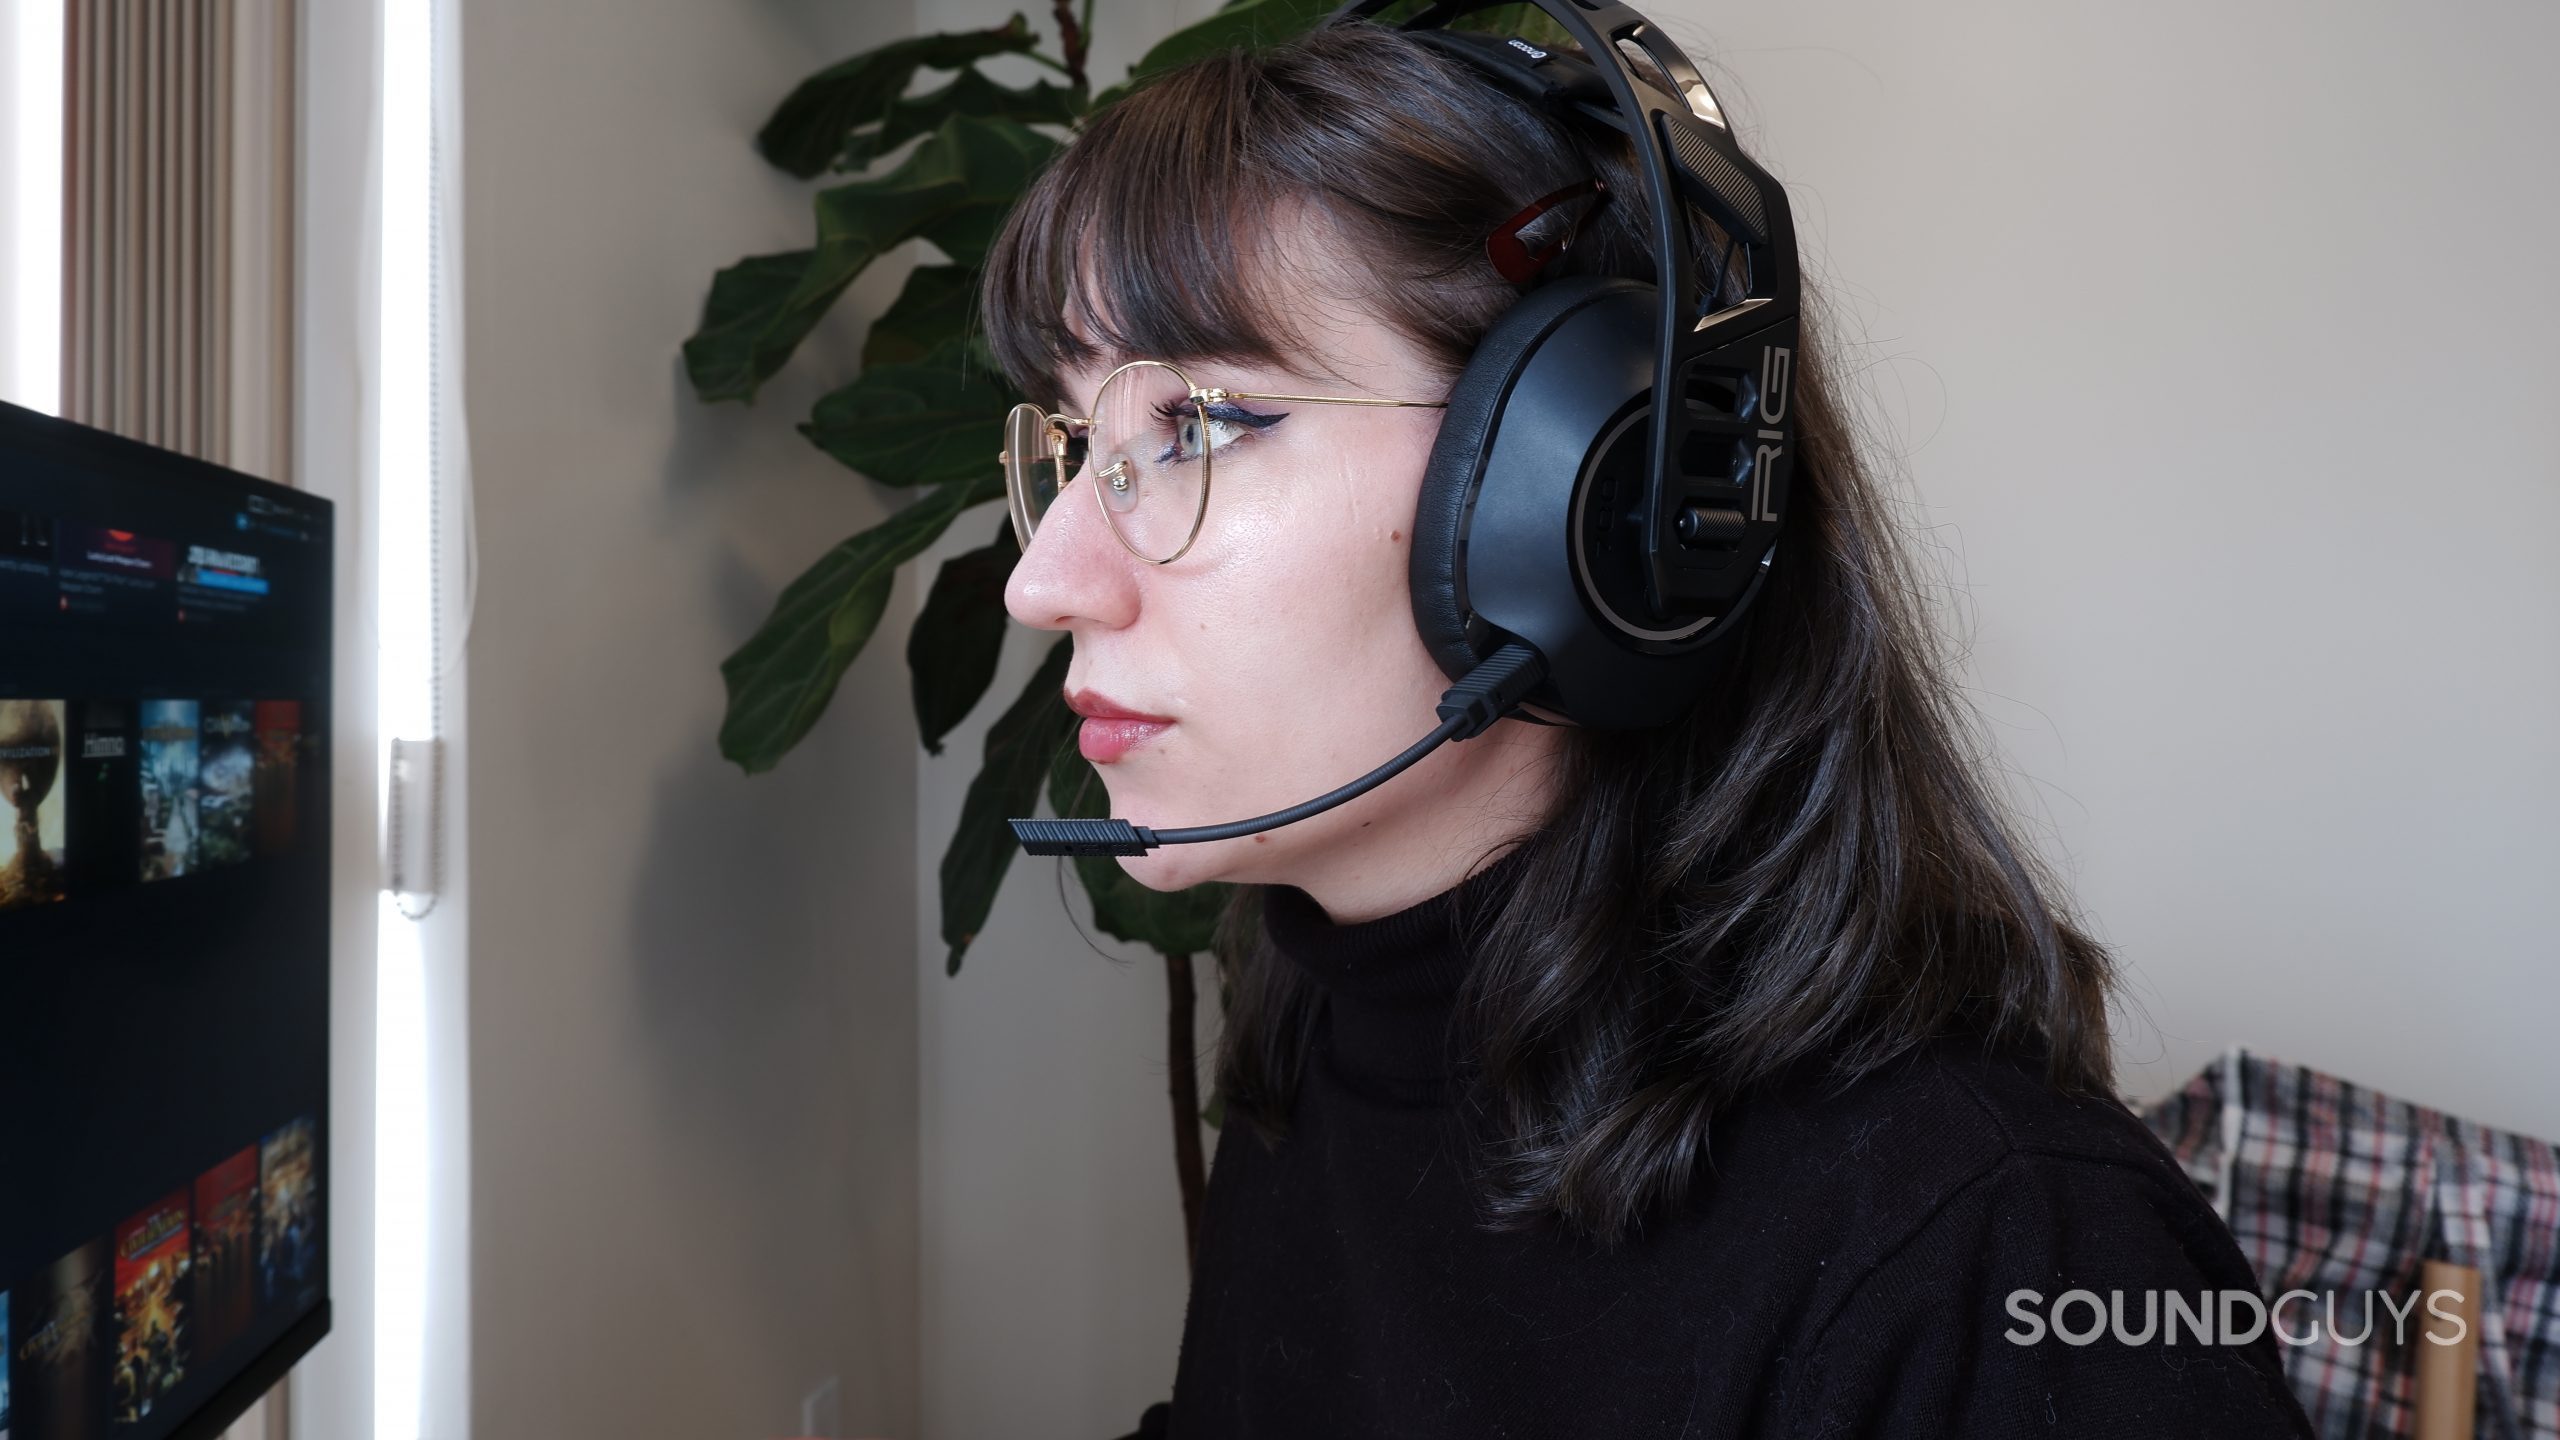 The RIG 700 PRO HS on the author's head.